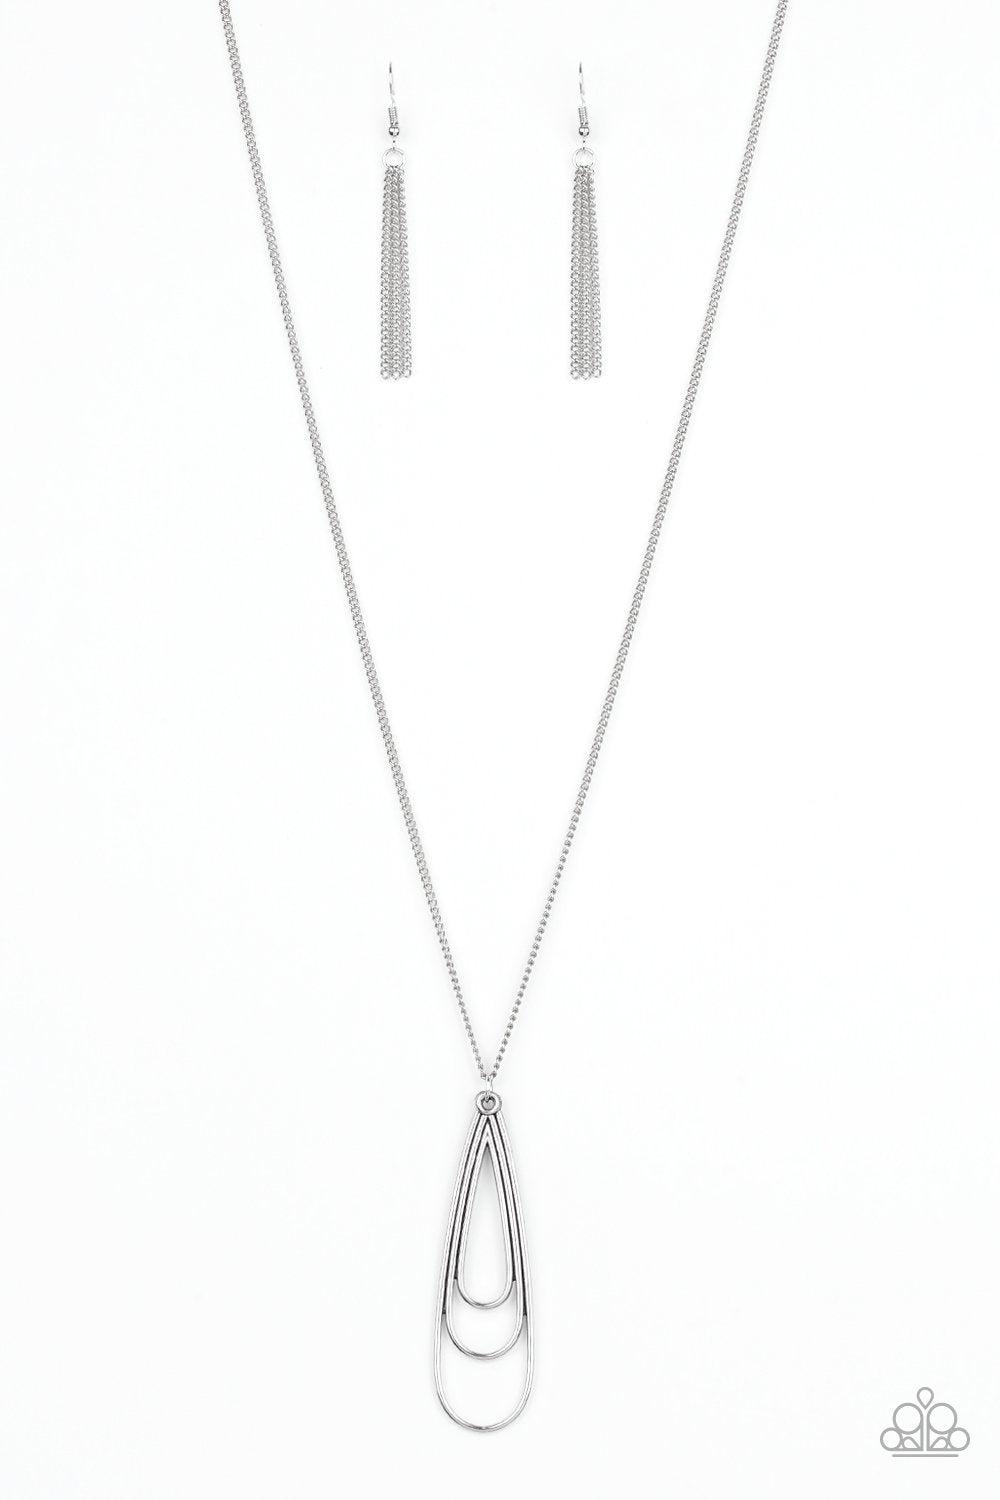 The Big Three Silver Necklace - Paparazzi Accessories-CarasShop.com - $5 Jewelry by Cara Jewels